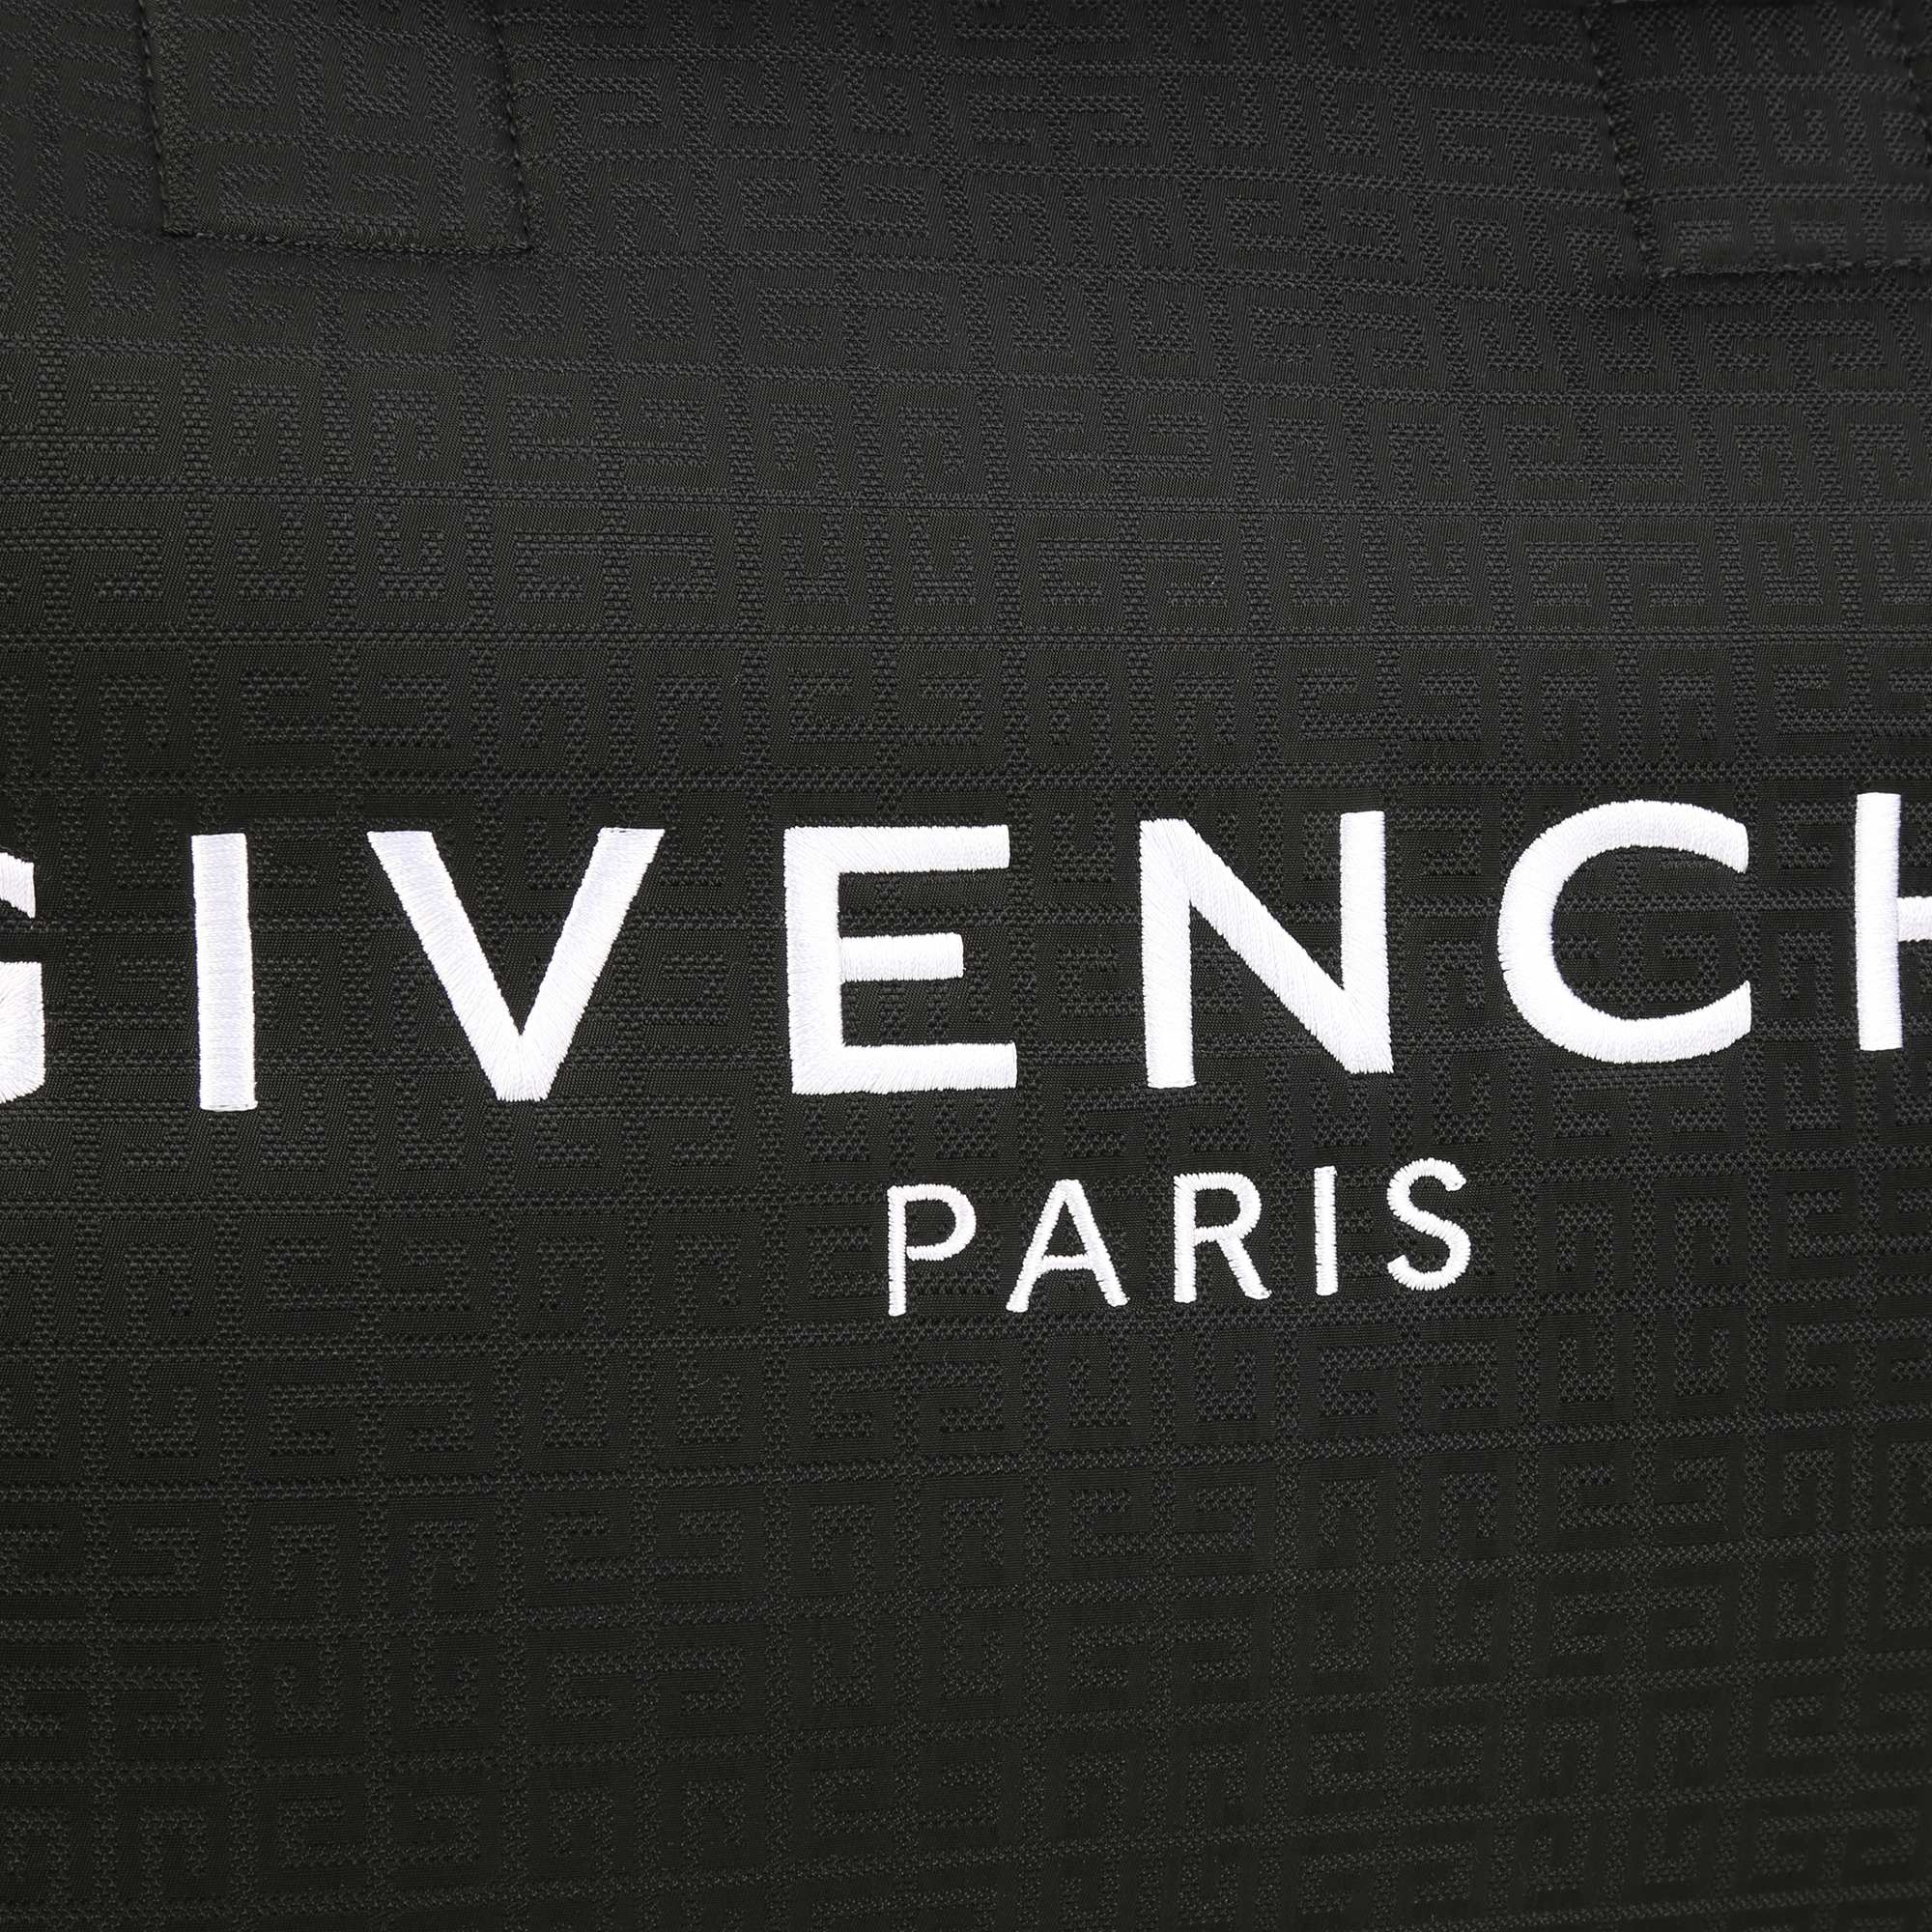 Coated changing bag GIVENCHY for UNISEX